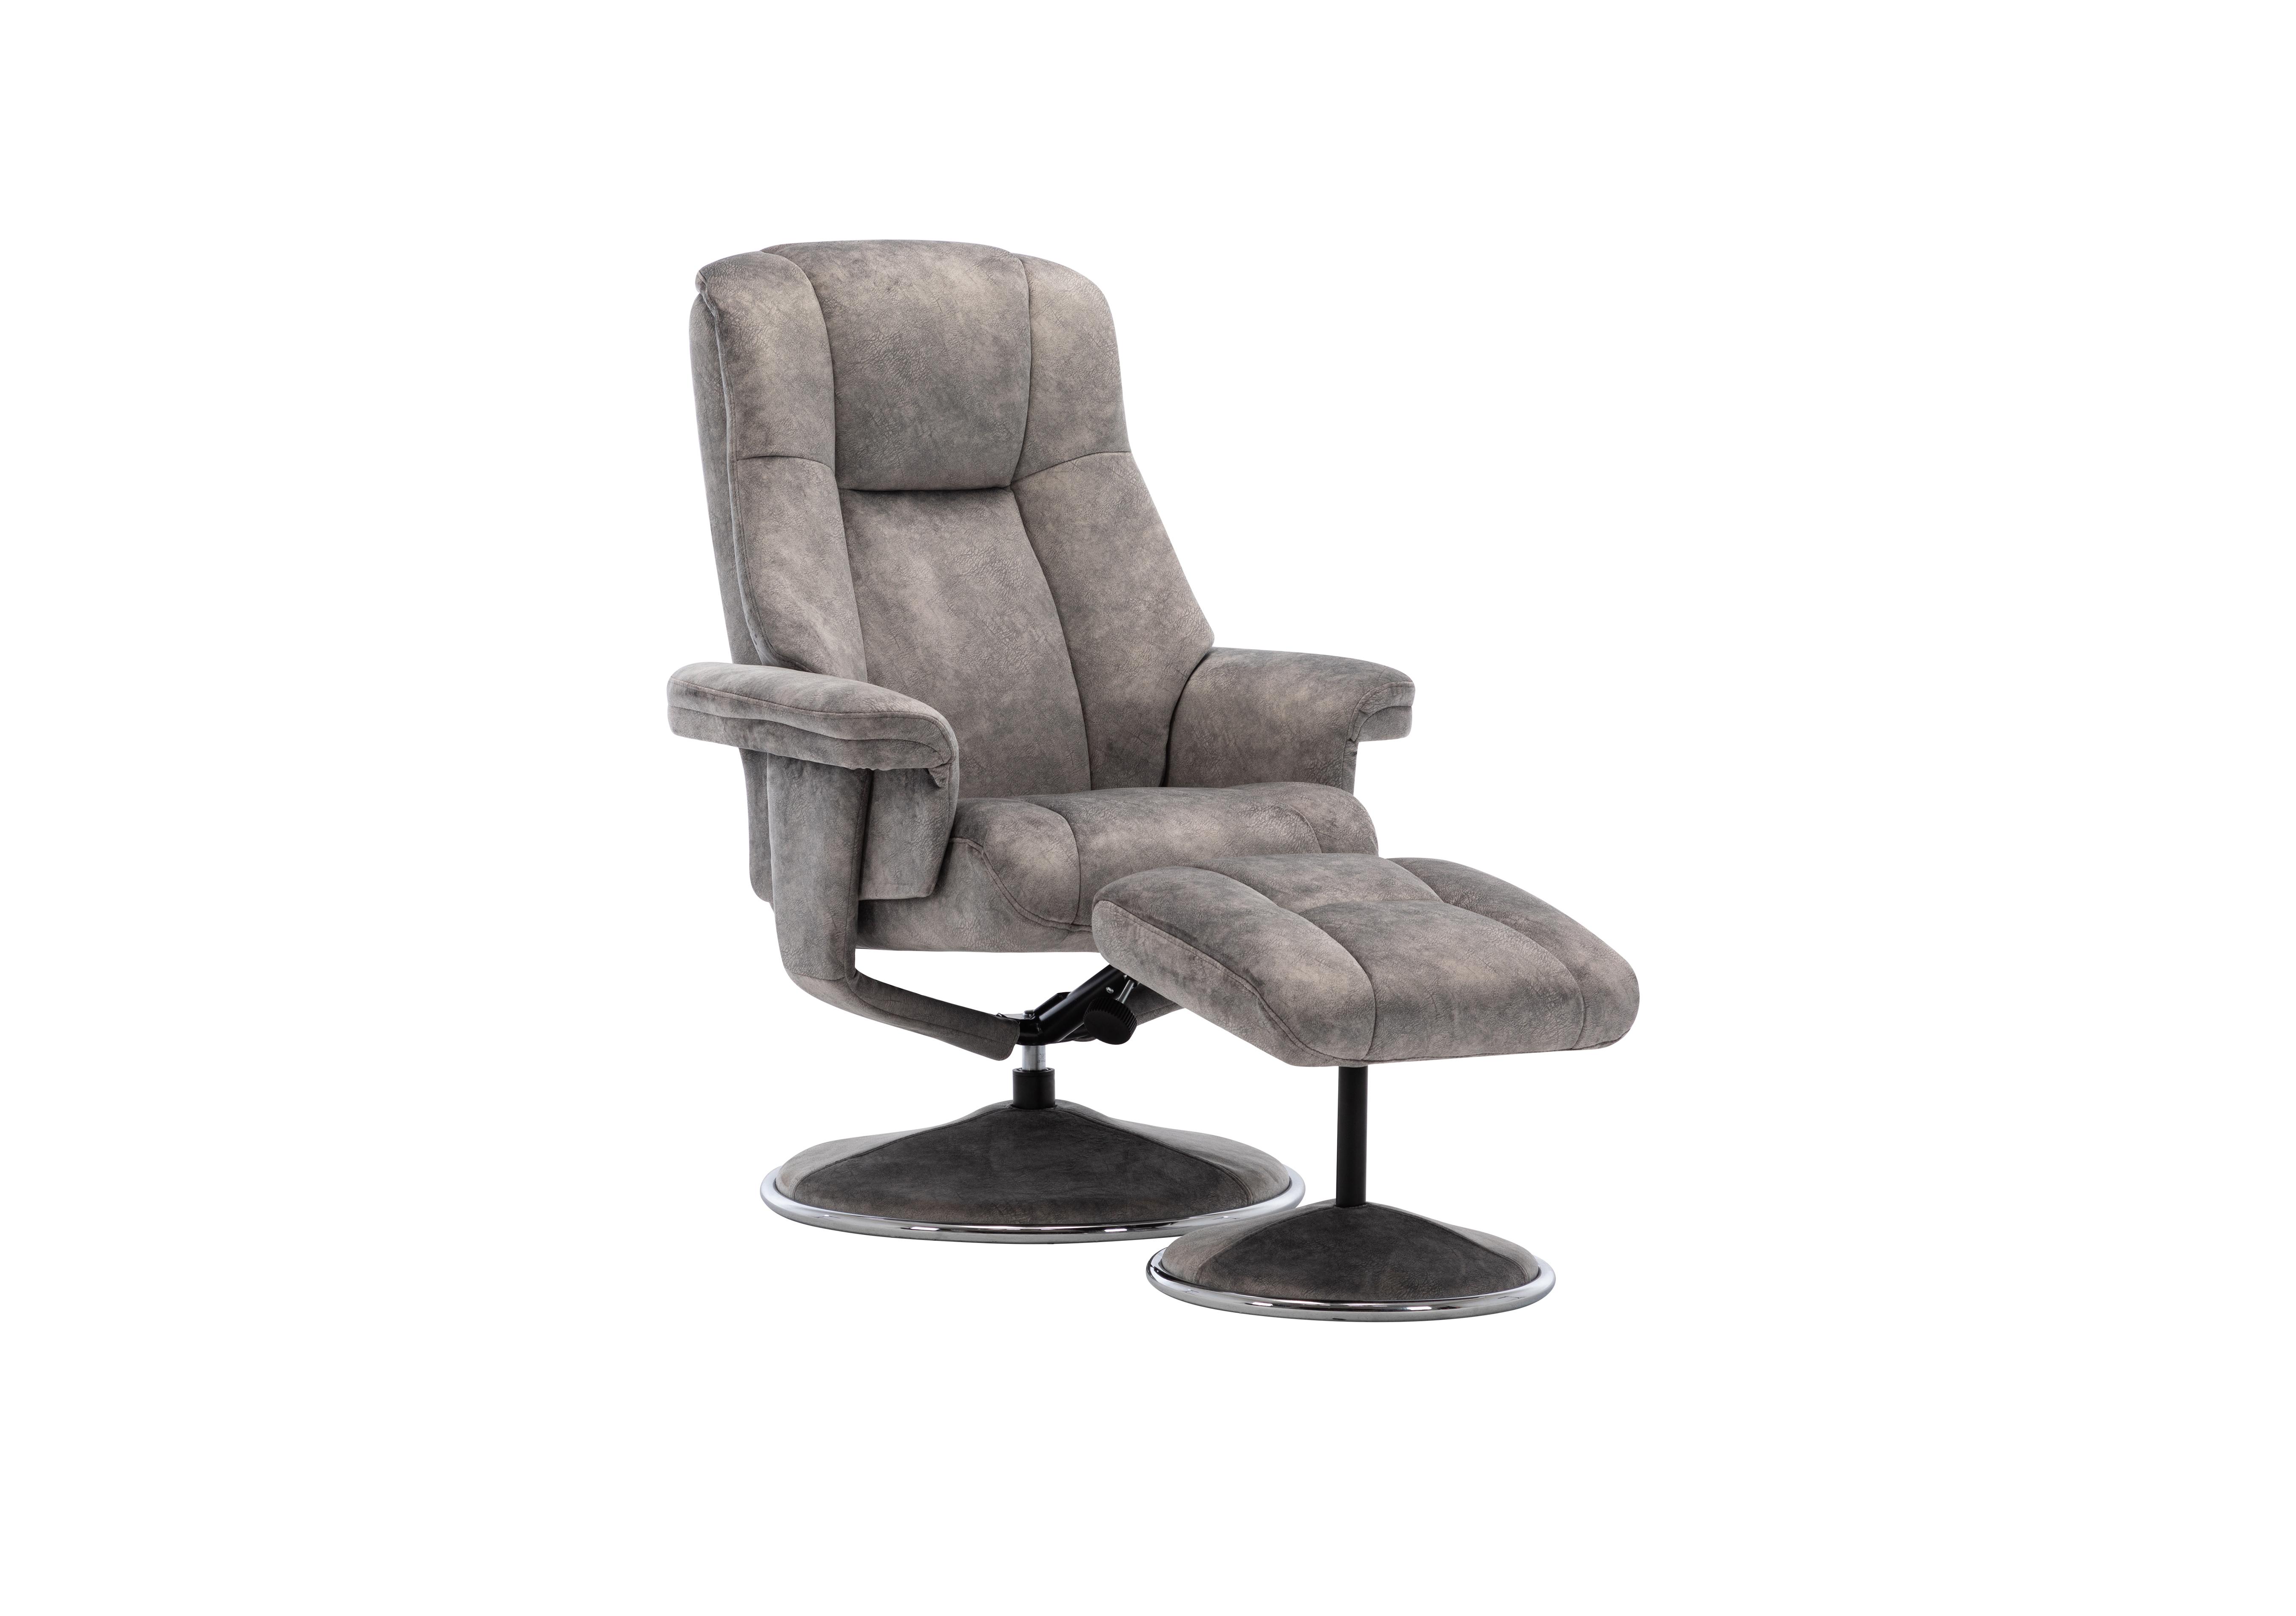 Troyes Fabric High-Back 360 Swivel Chair and Footstool in Elephant on Furniture Village